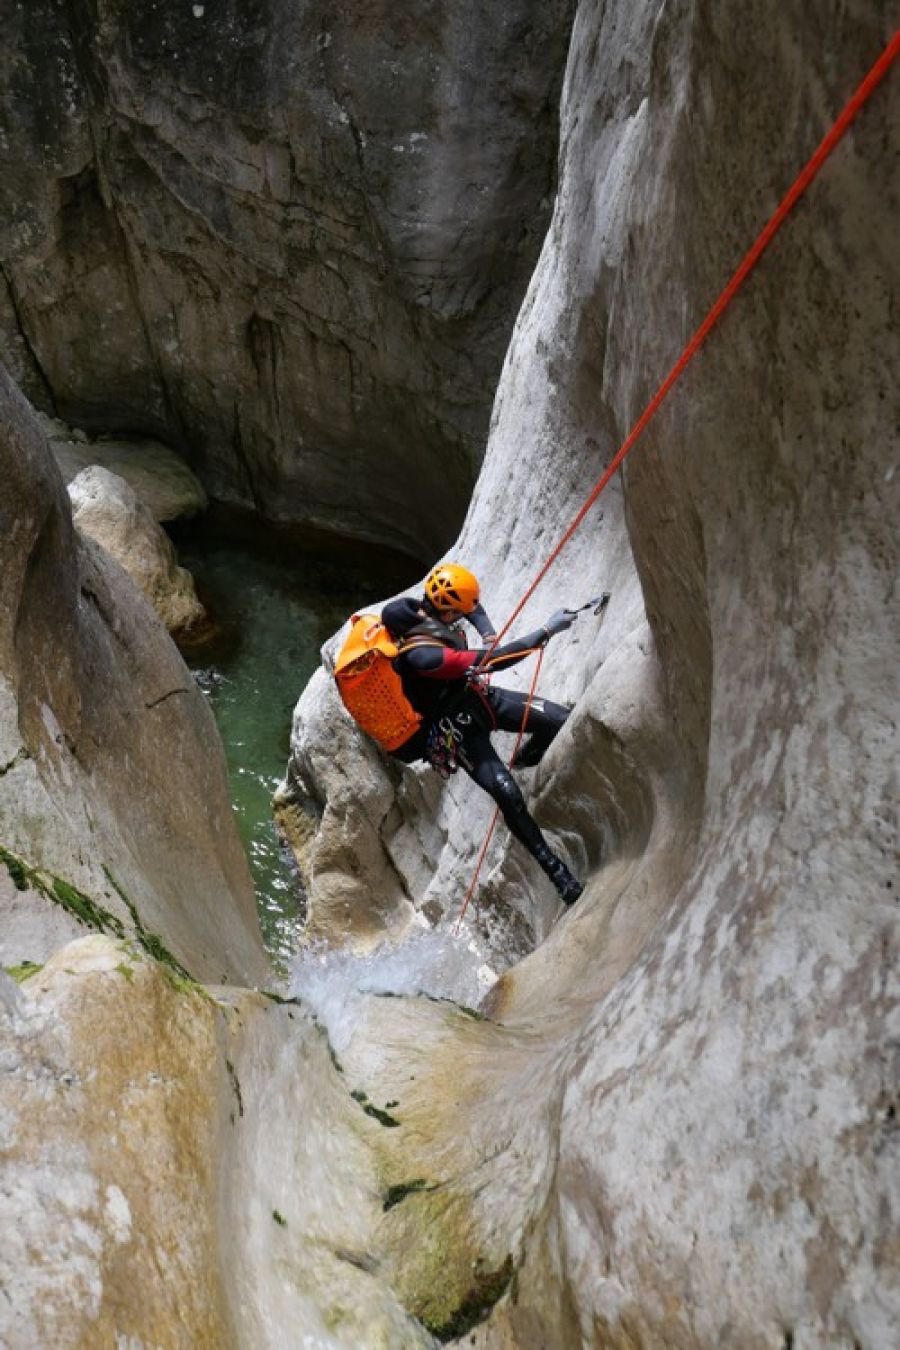 Canyoning Grigno (TN) - Apocalipse Now